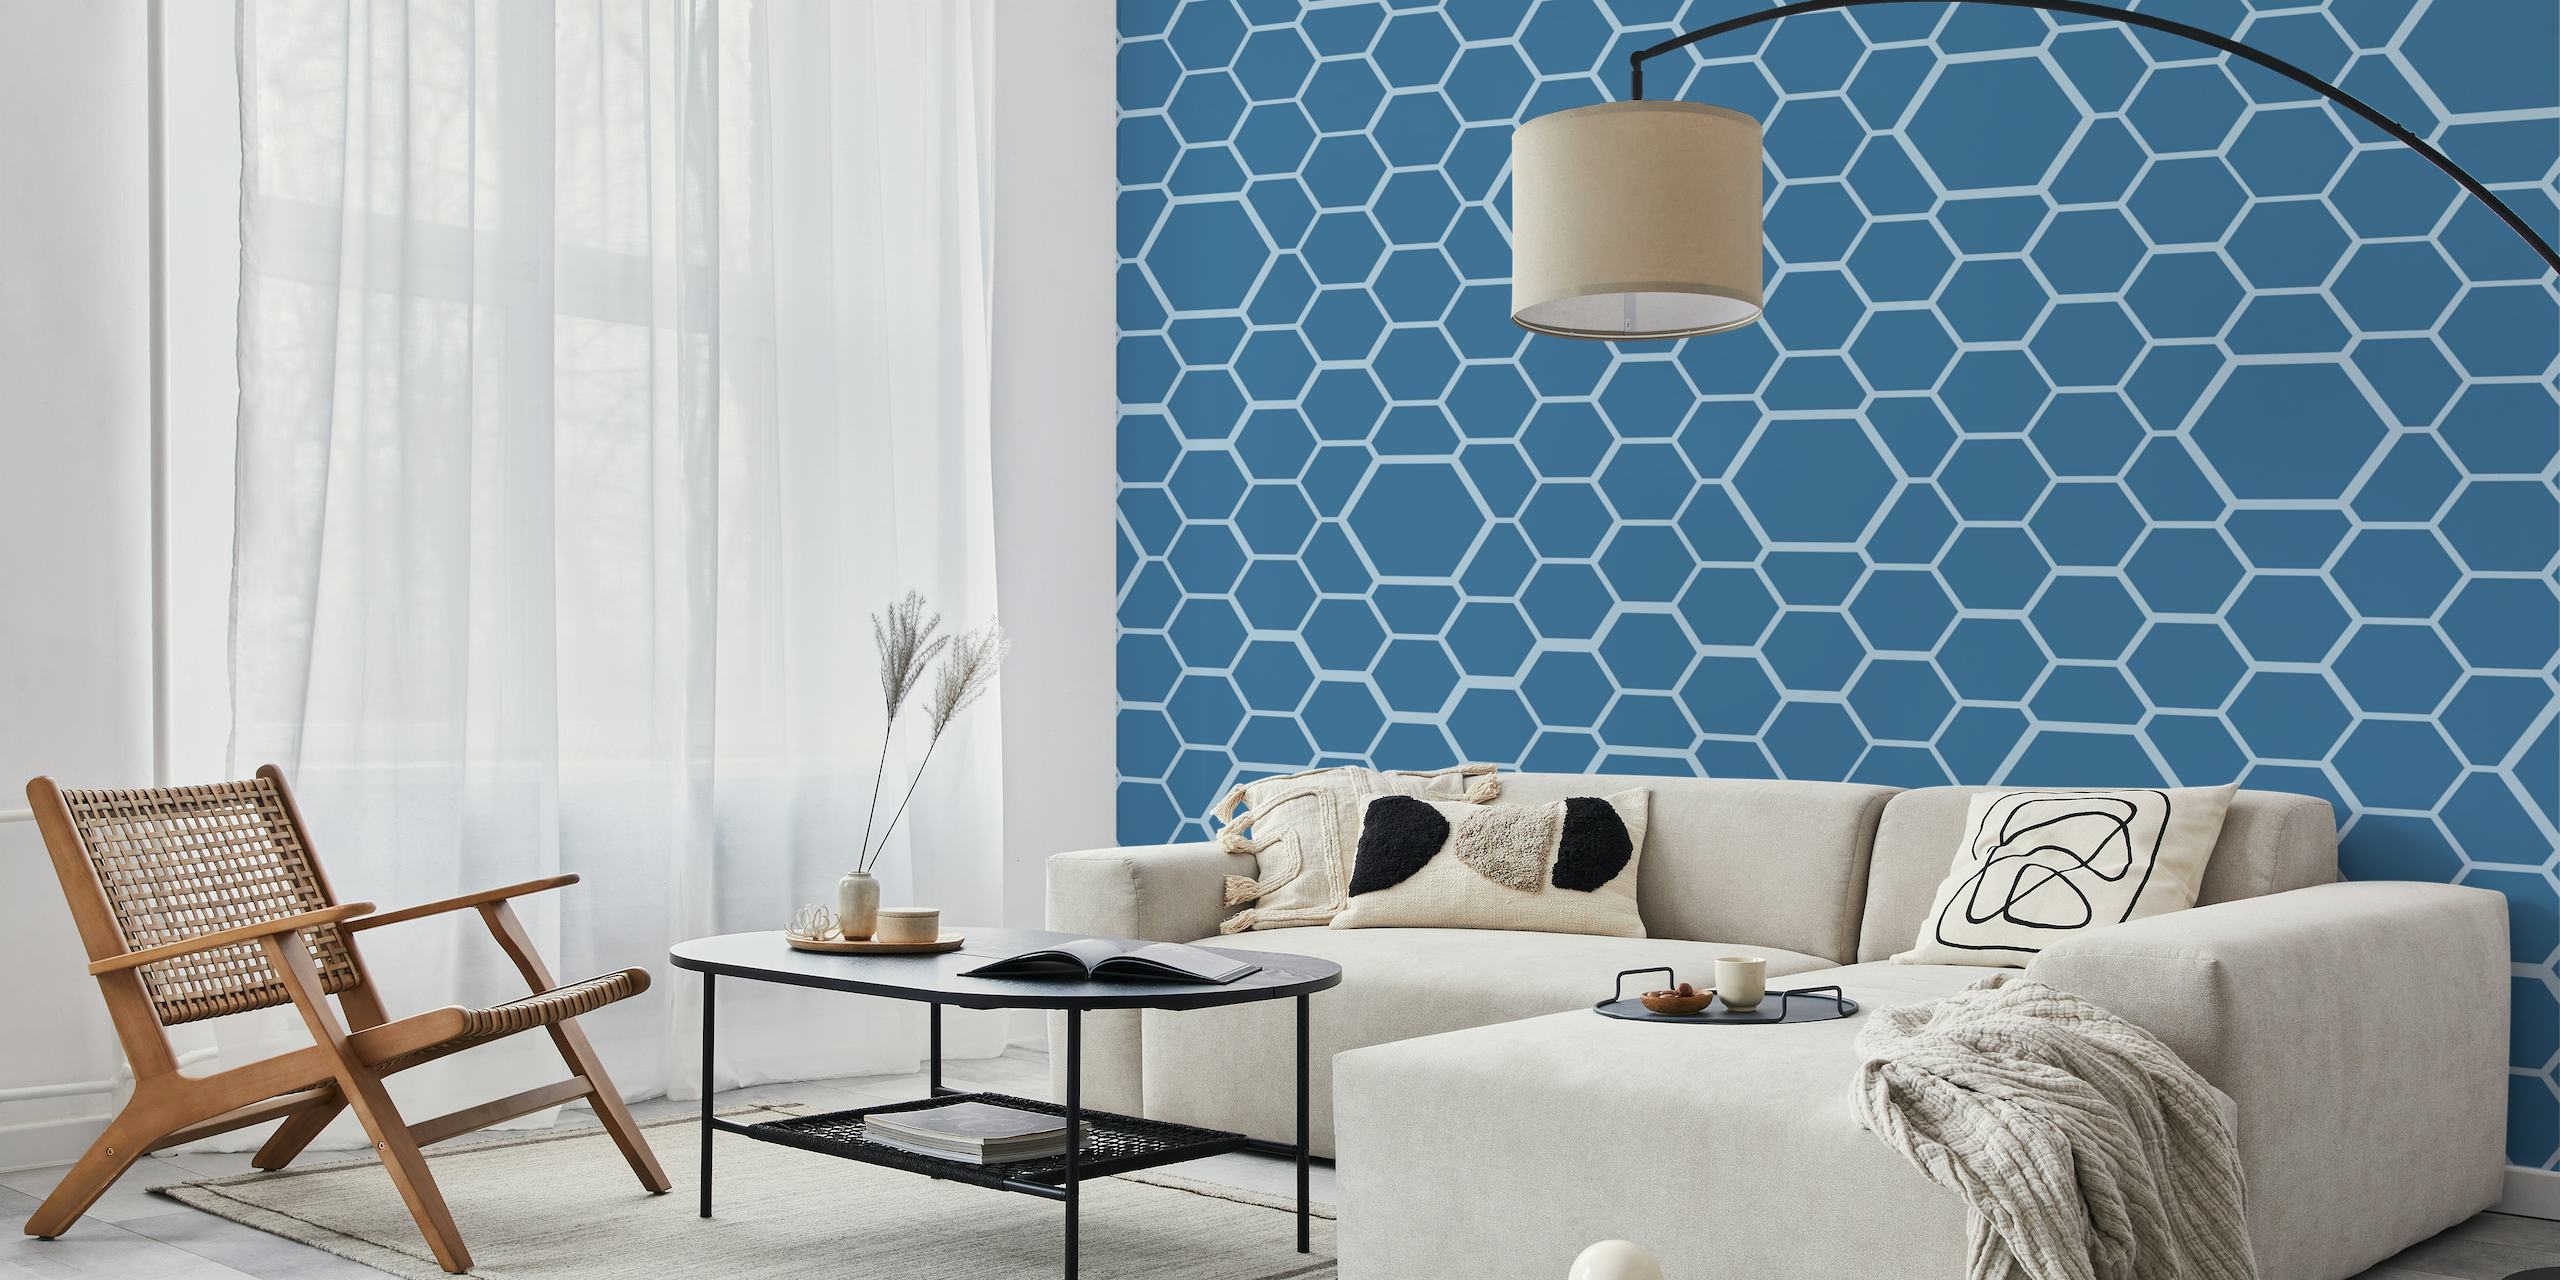 Blue honeycomb pattern wall mural with a geometric grid design